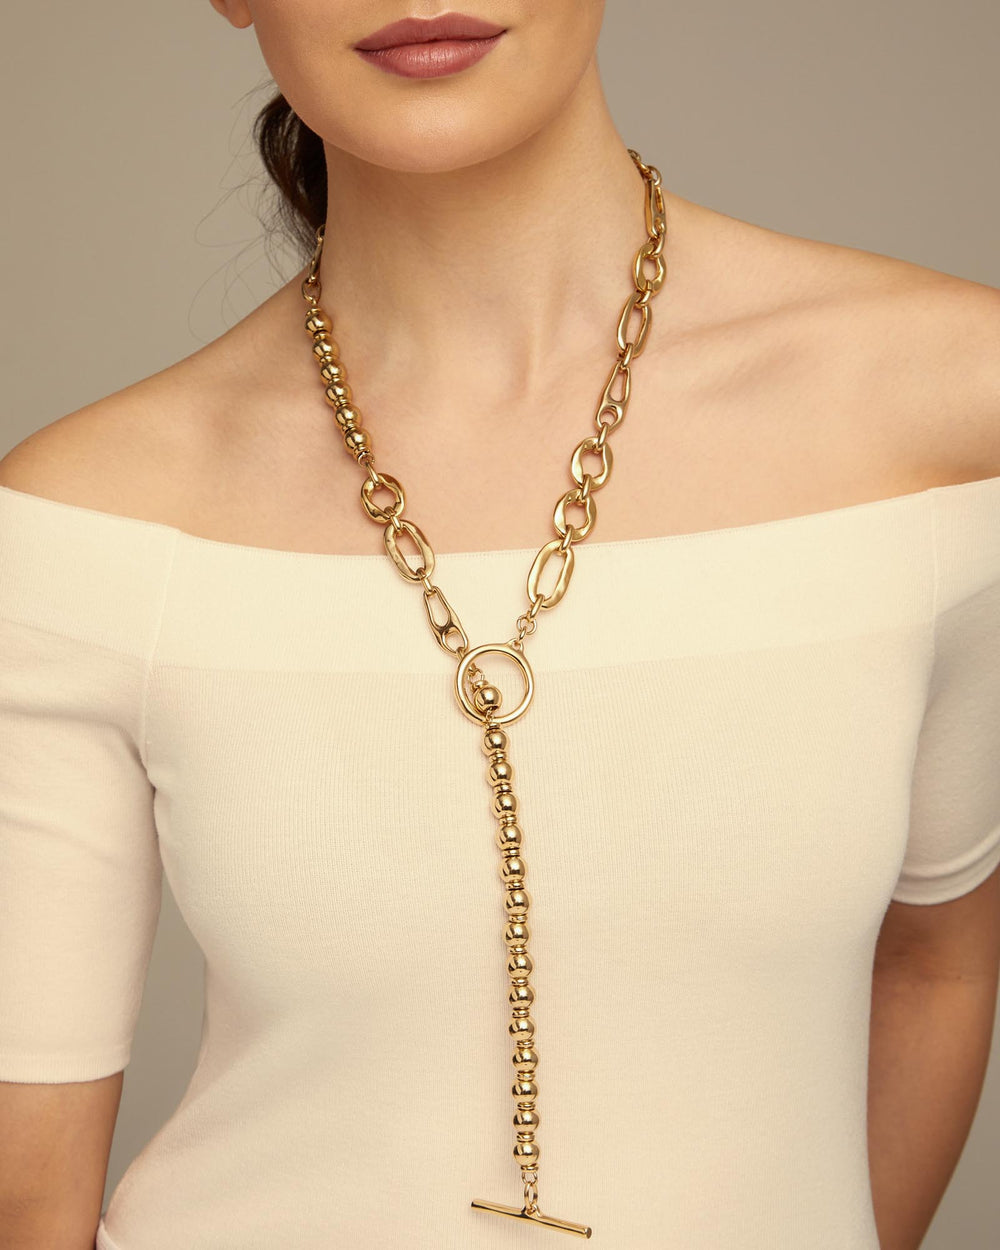 YOLO NECKLACE-GOLD - Kingfisher Road - Online Boutique